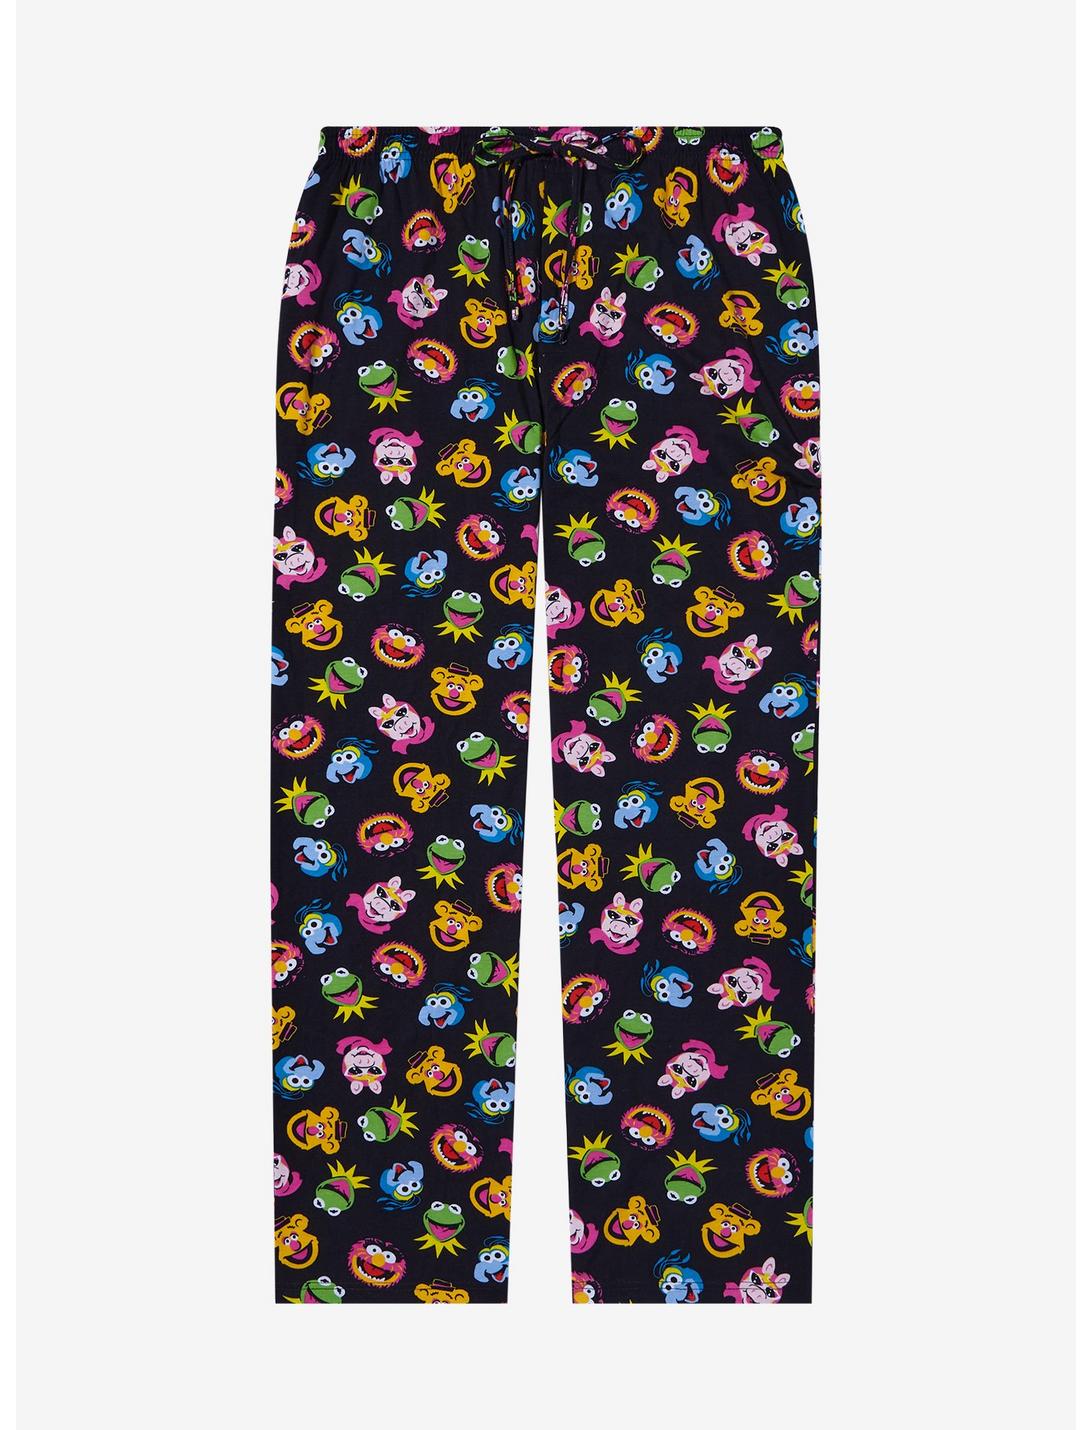 The Muppets Allover Print Pajama Pants, MULTI, hi-res